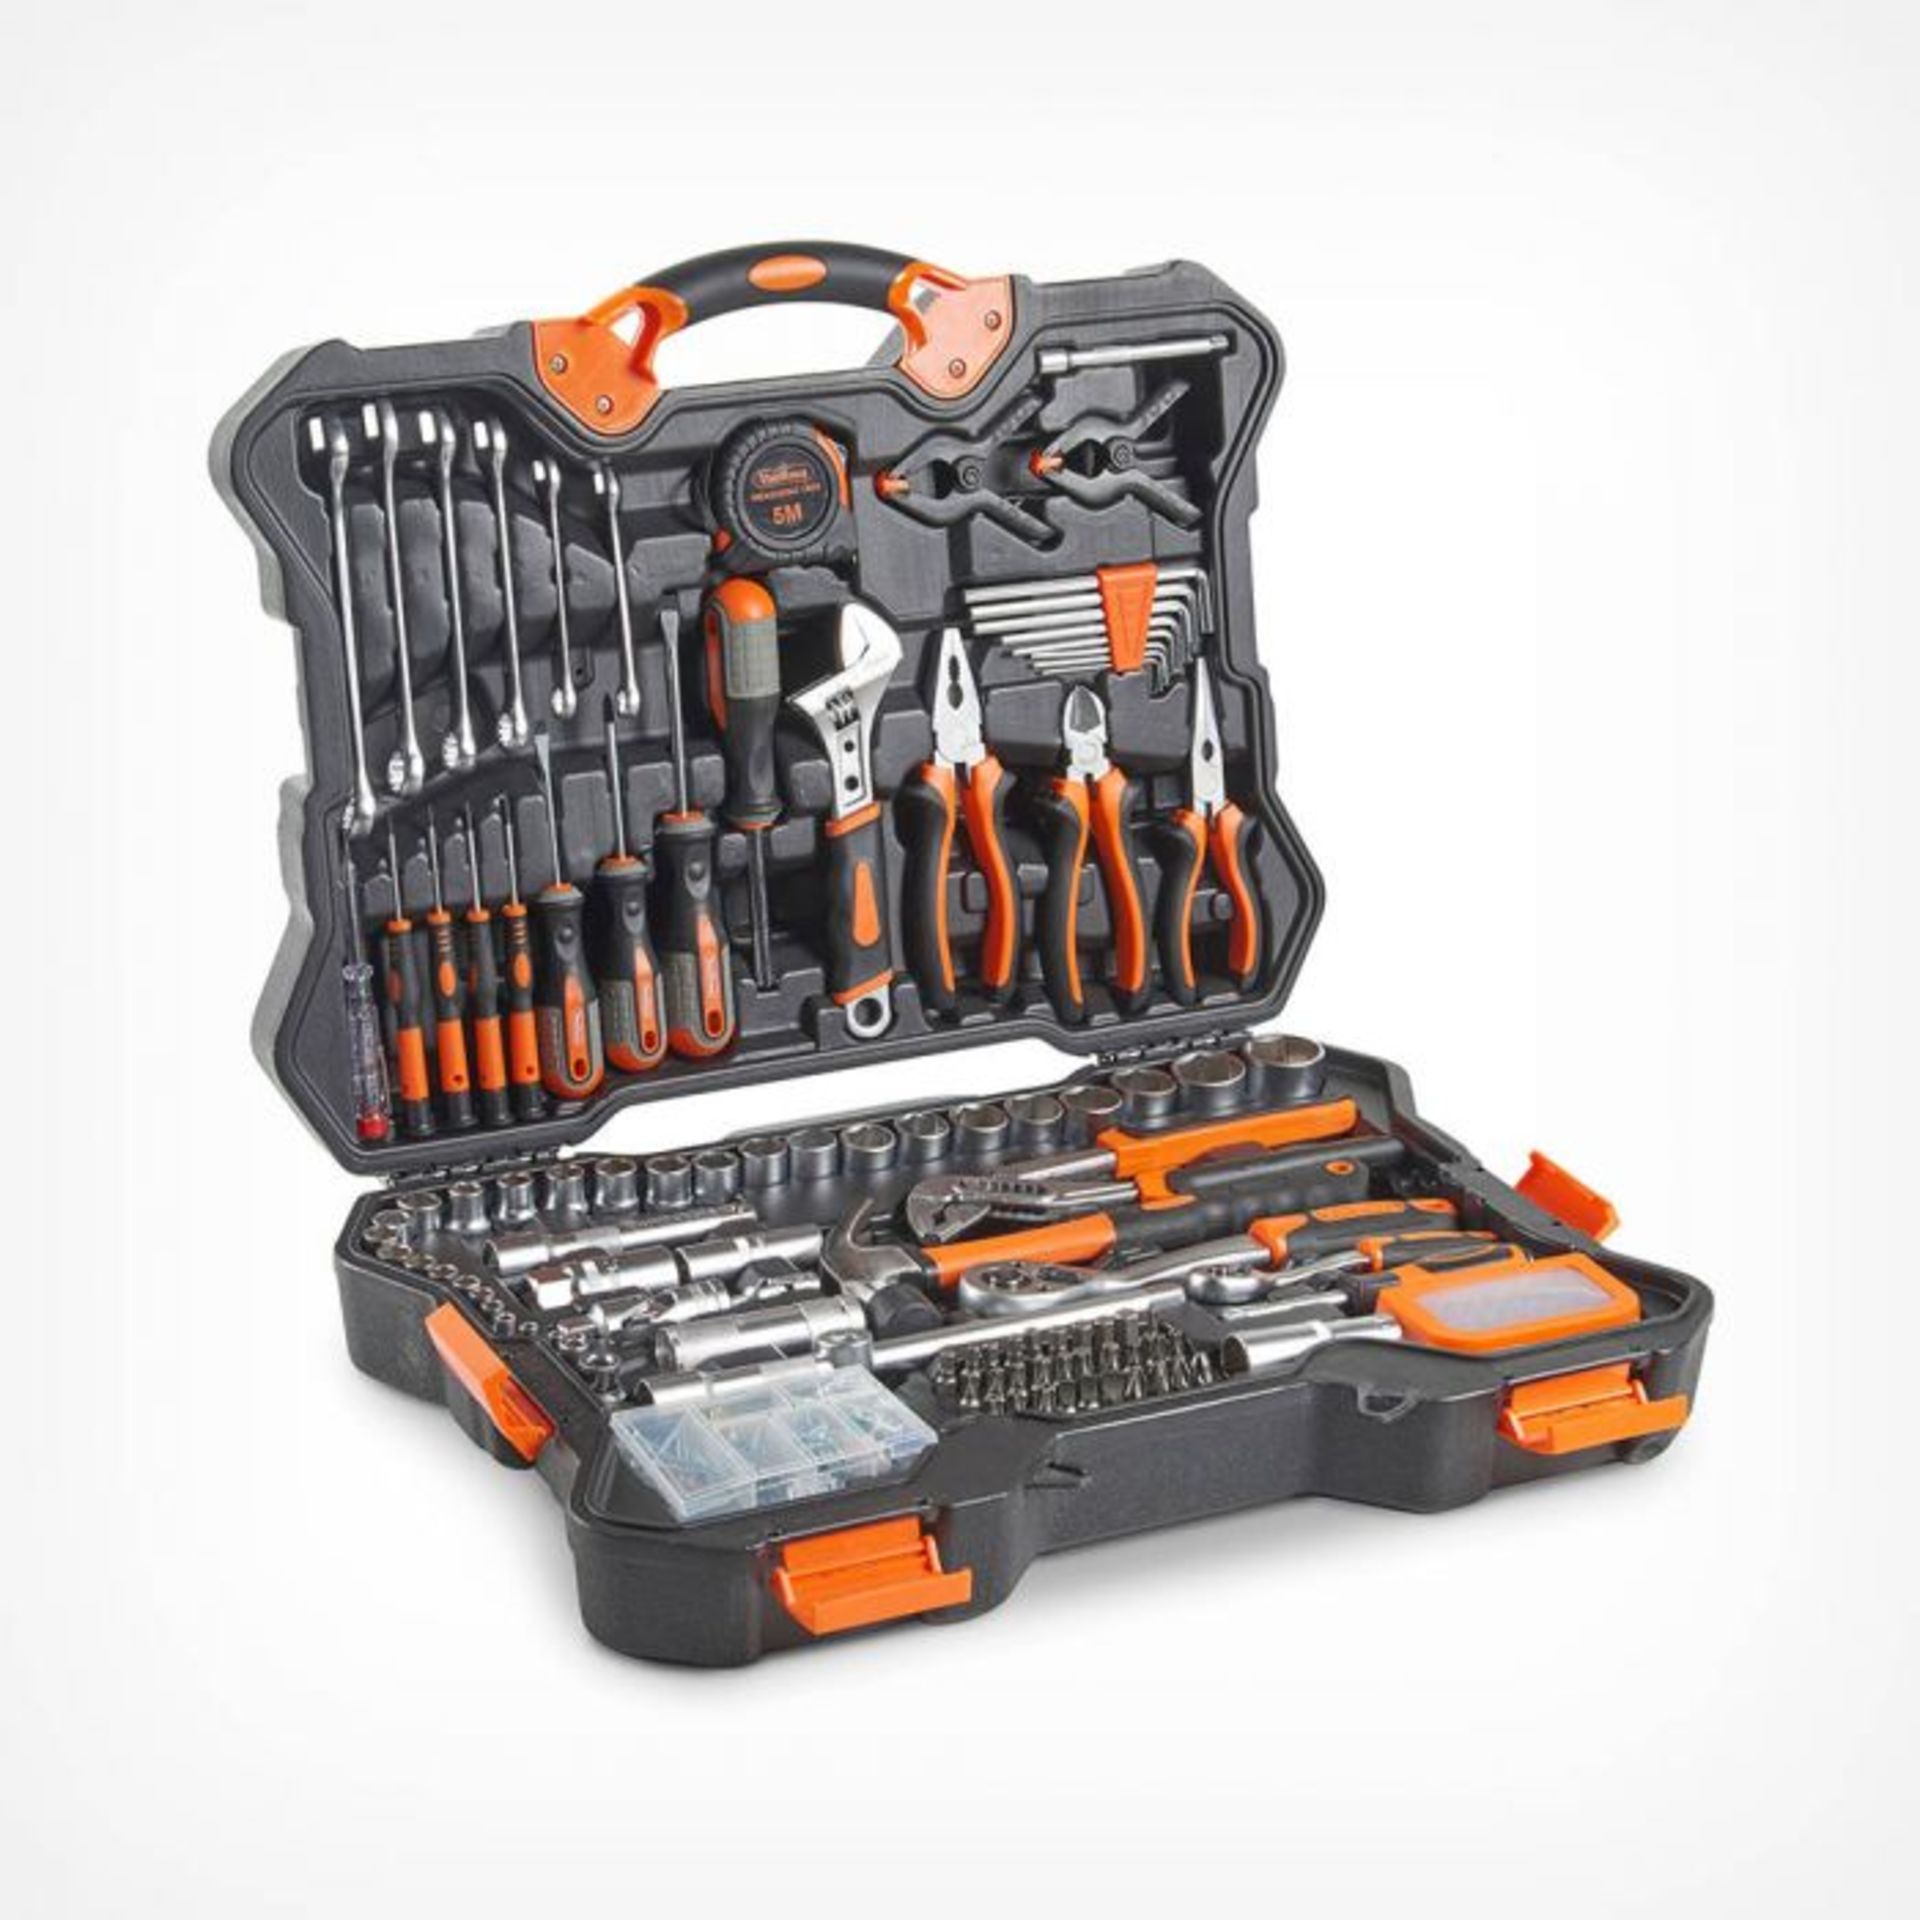 256pc Premium Tool & Socket Set. This all-purpose kit comes equipped with 256 hand tools and